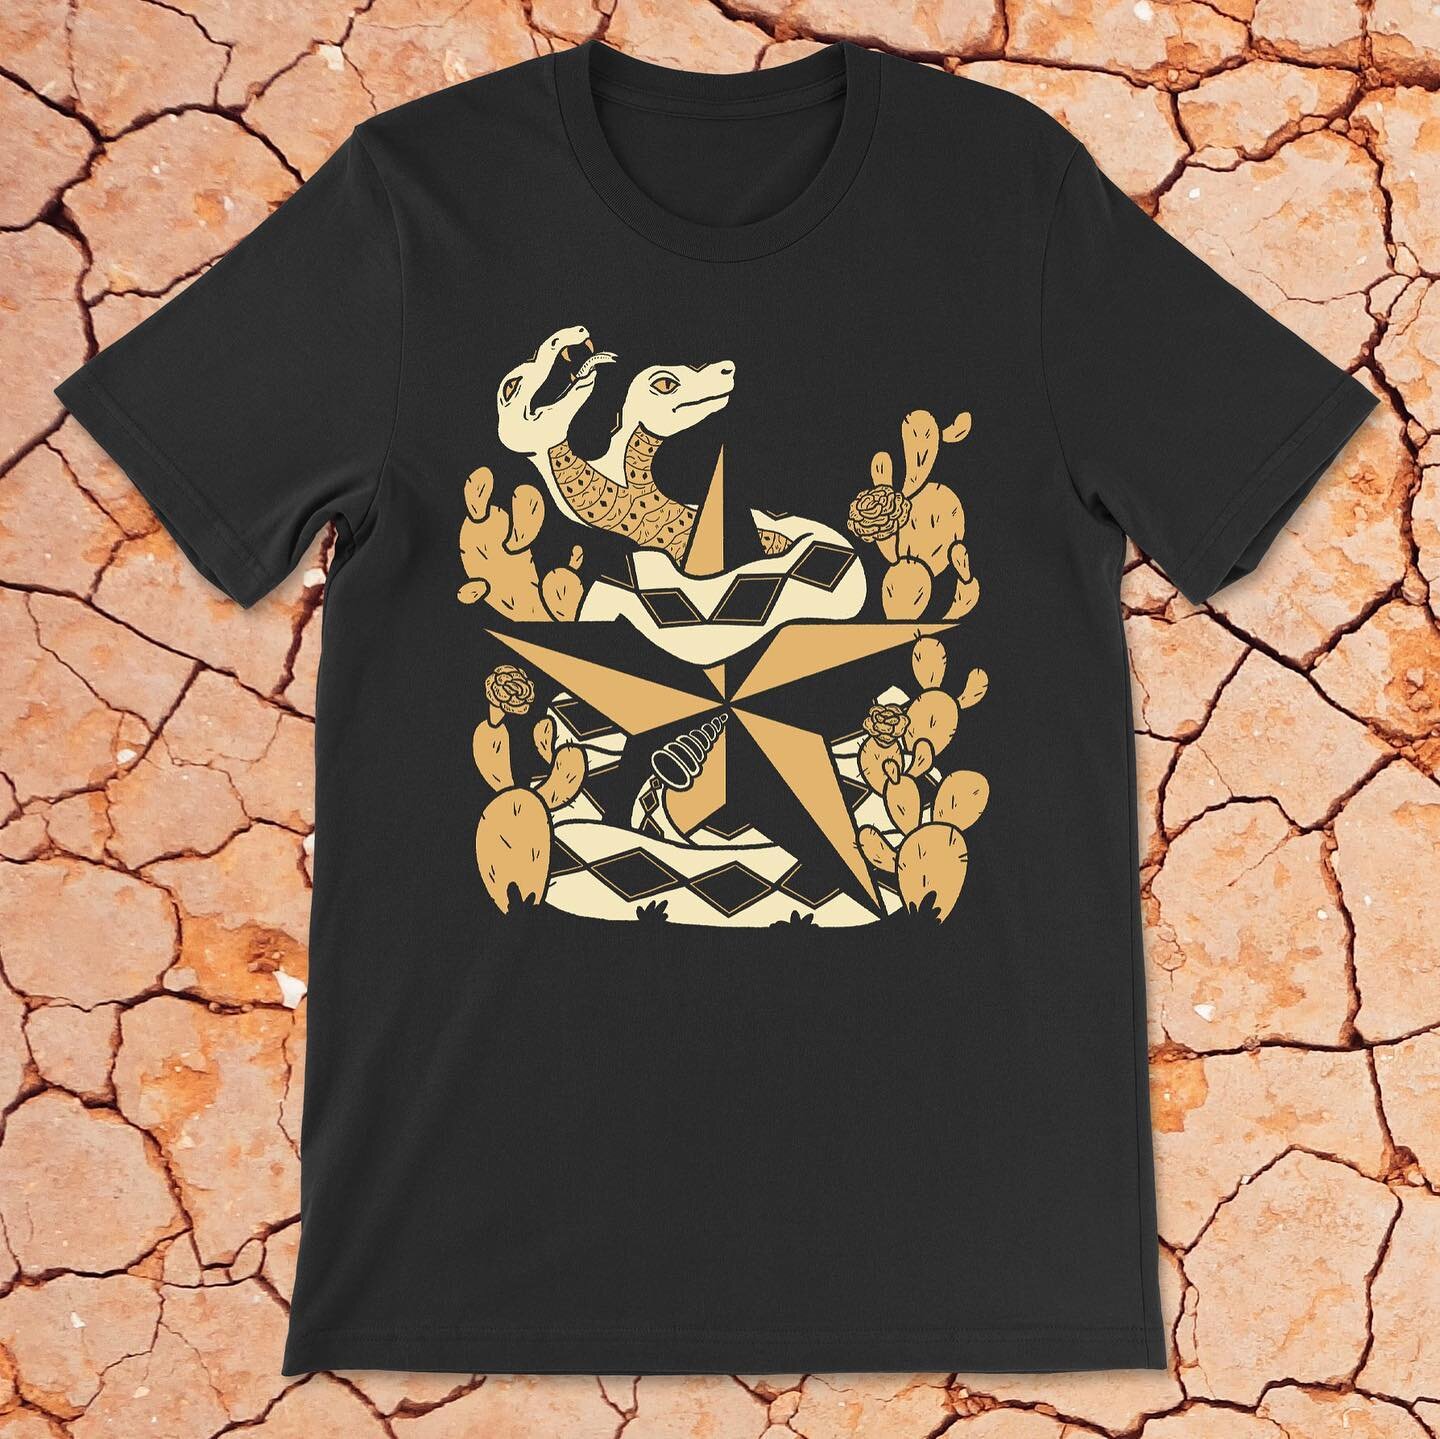 This double snake tee is up for one more week!! Buy one to have two friends to wear in these trying times. Printed at @rawpaw 
.
.
.
.
.
#art #snake #snakes #rattlesnake #cactus #desert #western #vintagewesternwear #tshirt #tshirtdesign #atx #atxarti